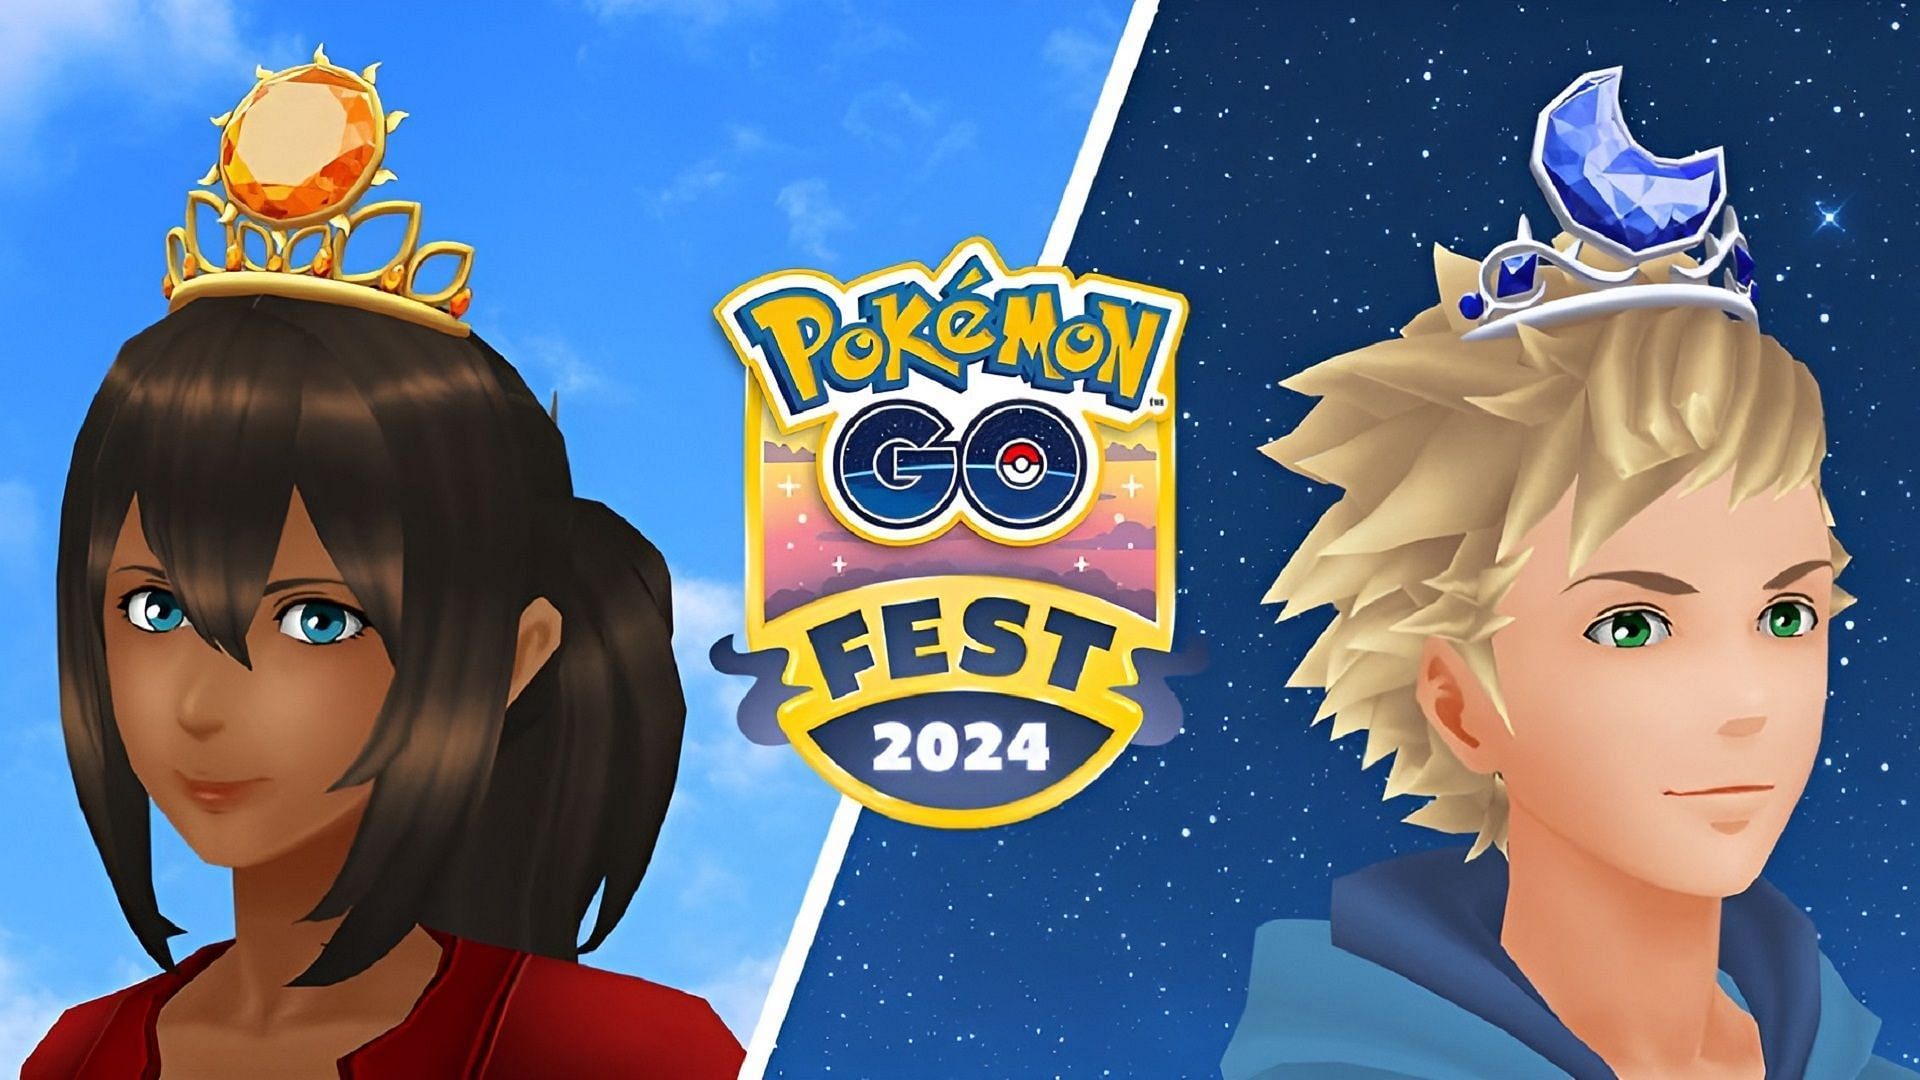 &quot;Kind of misleading marketing&quot;: Pokemon GO player comments on GO Fest 2024 poster 